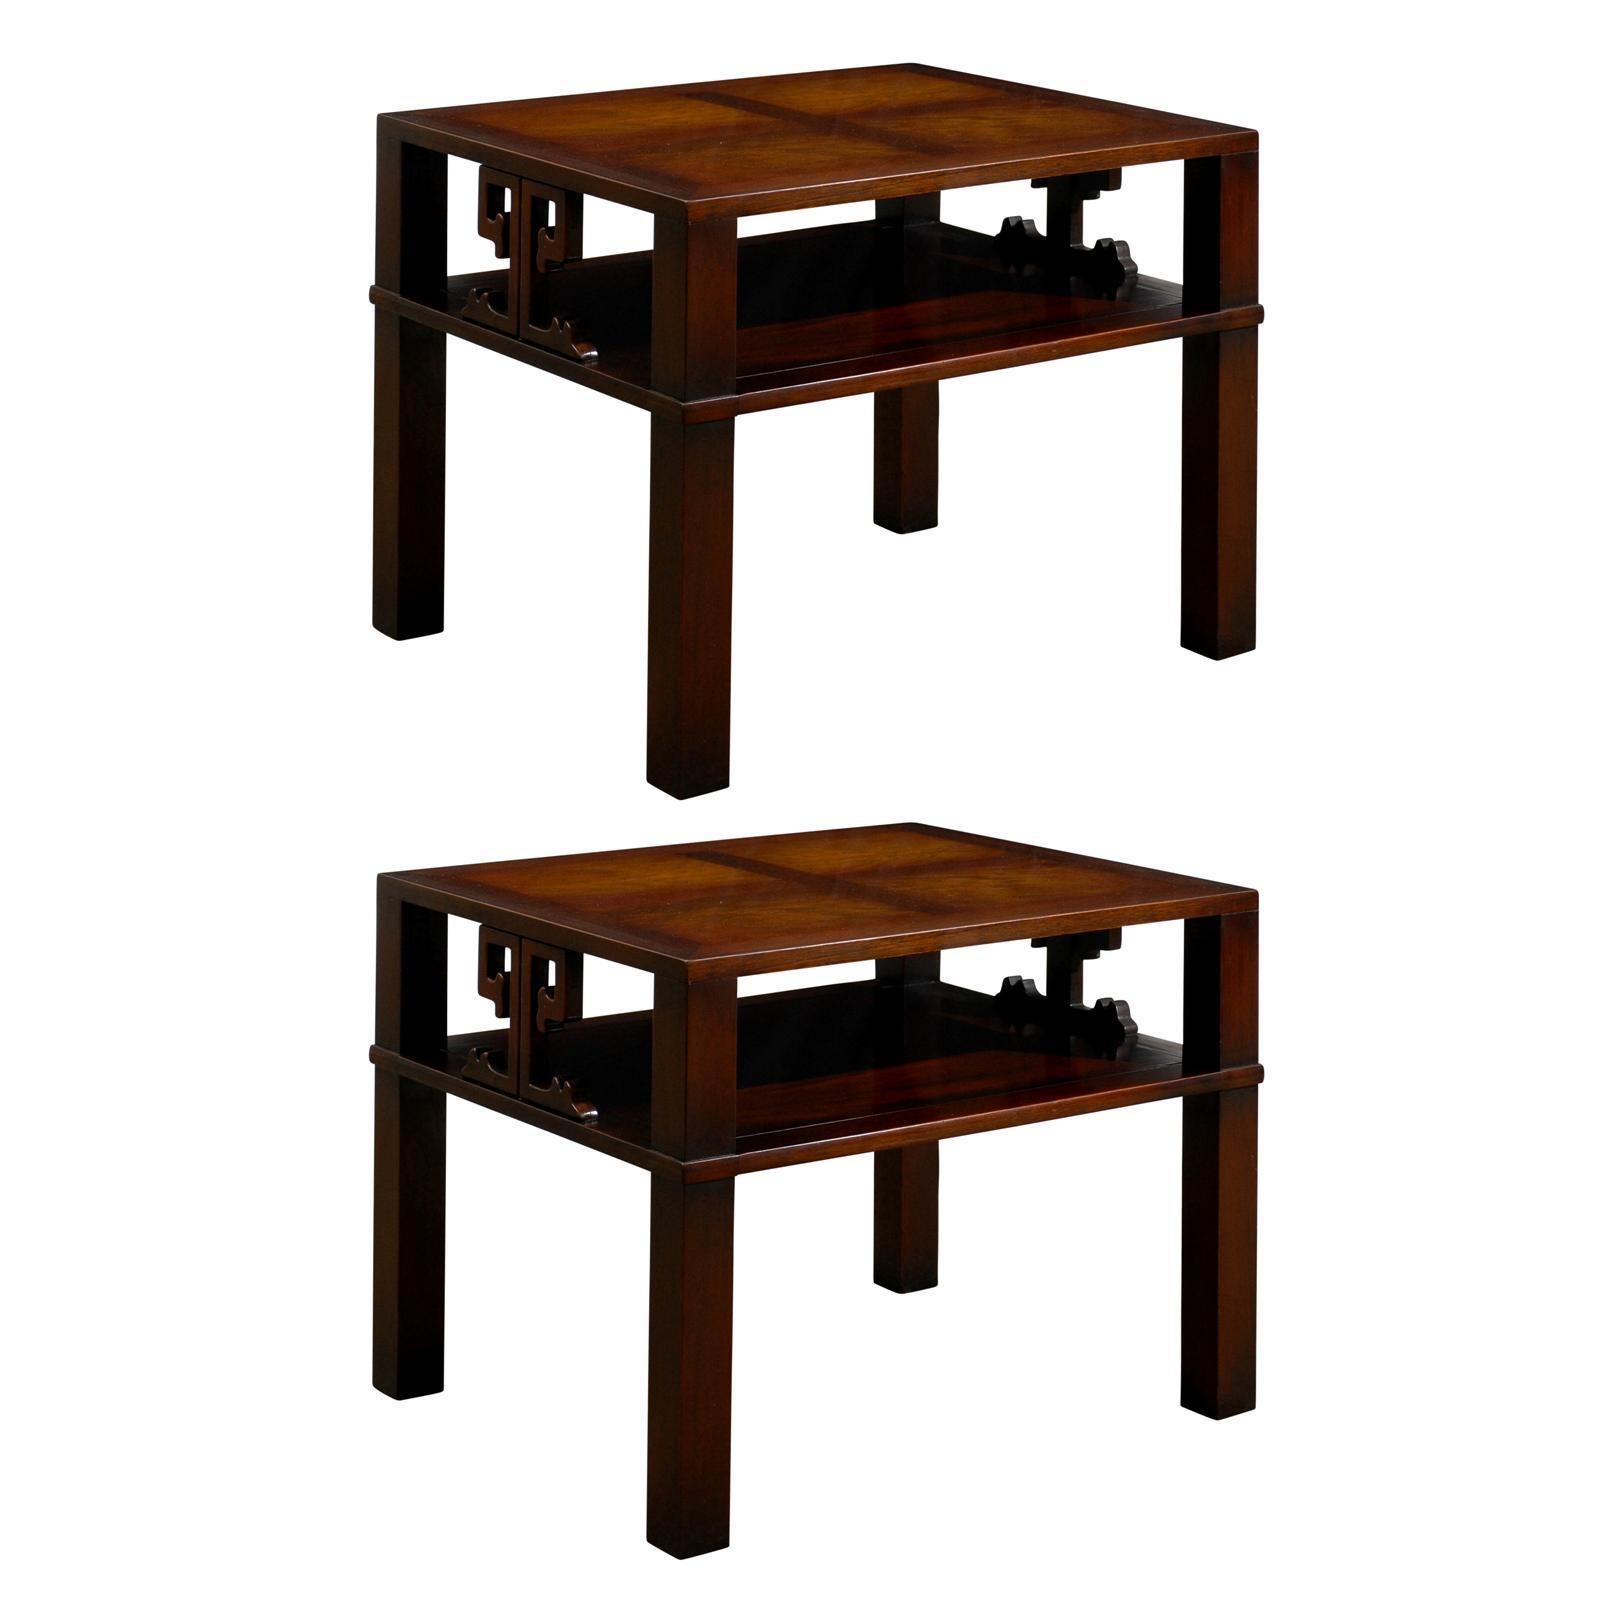 Fabulous Pair of Heritage Henredon End Table/ Night Stands in Flame Mahogony